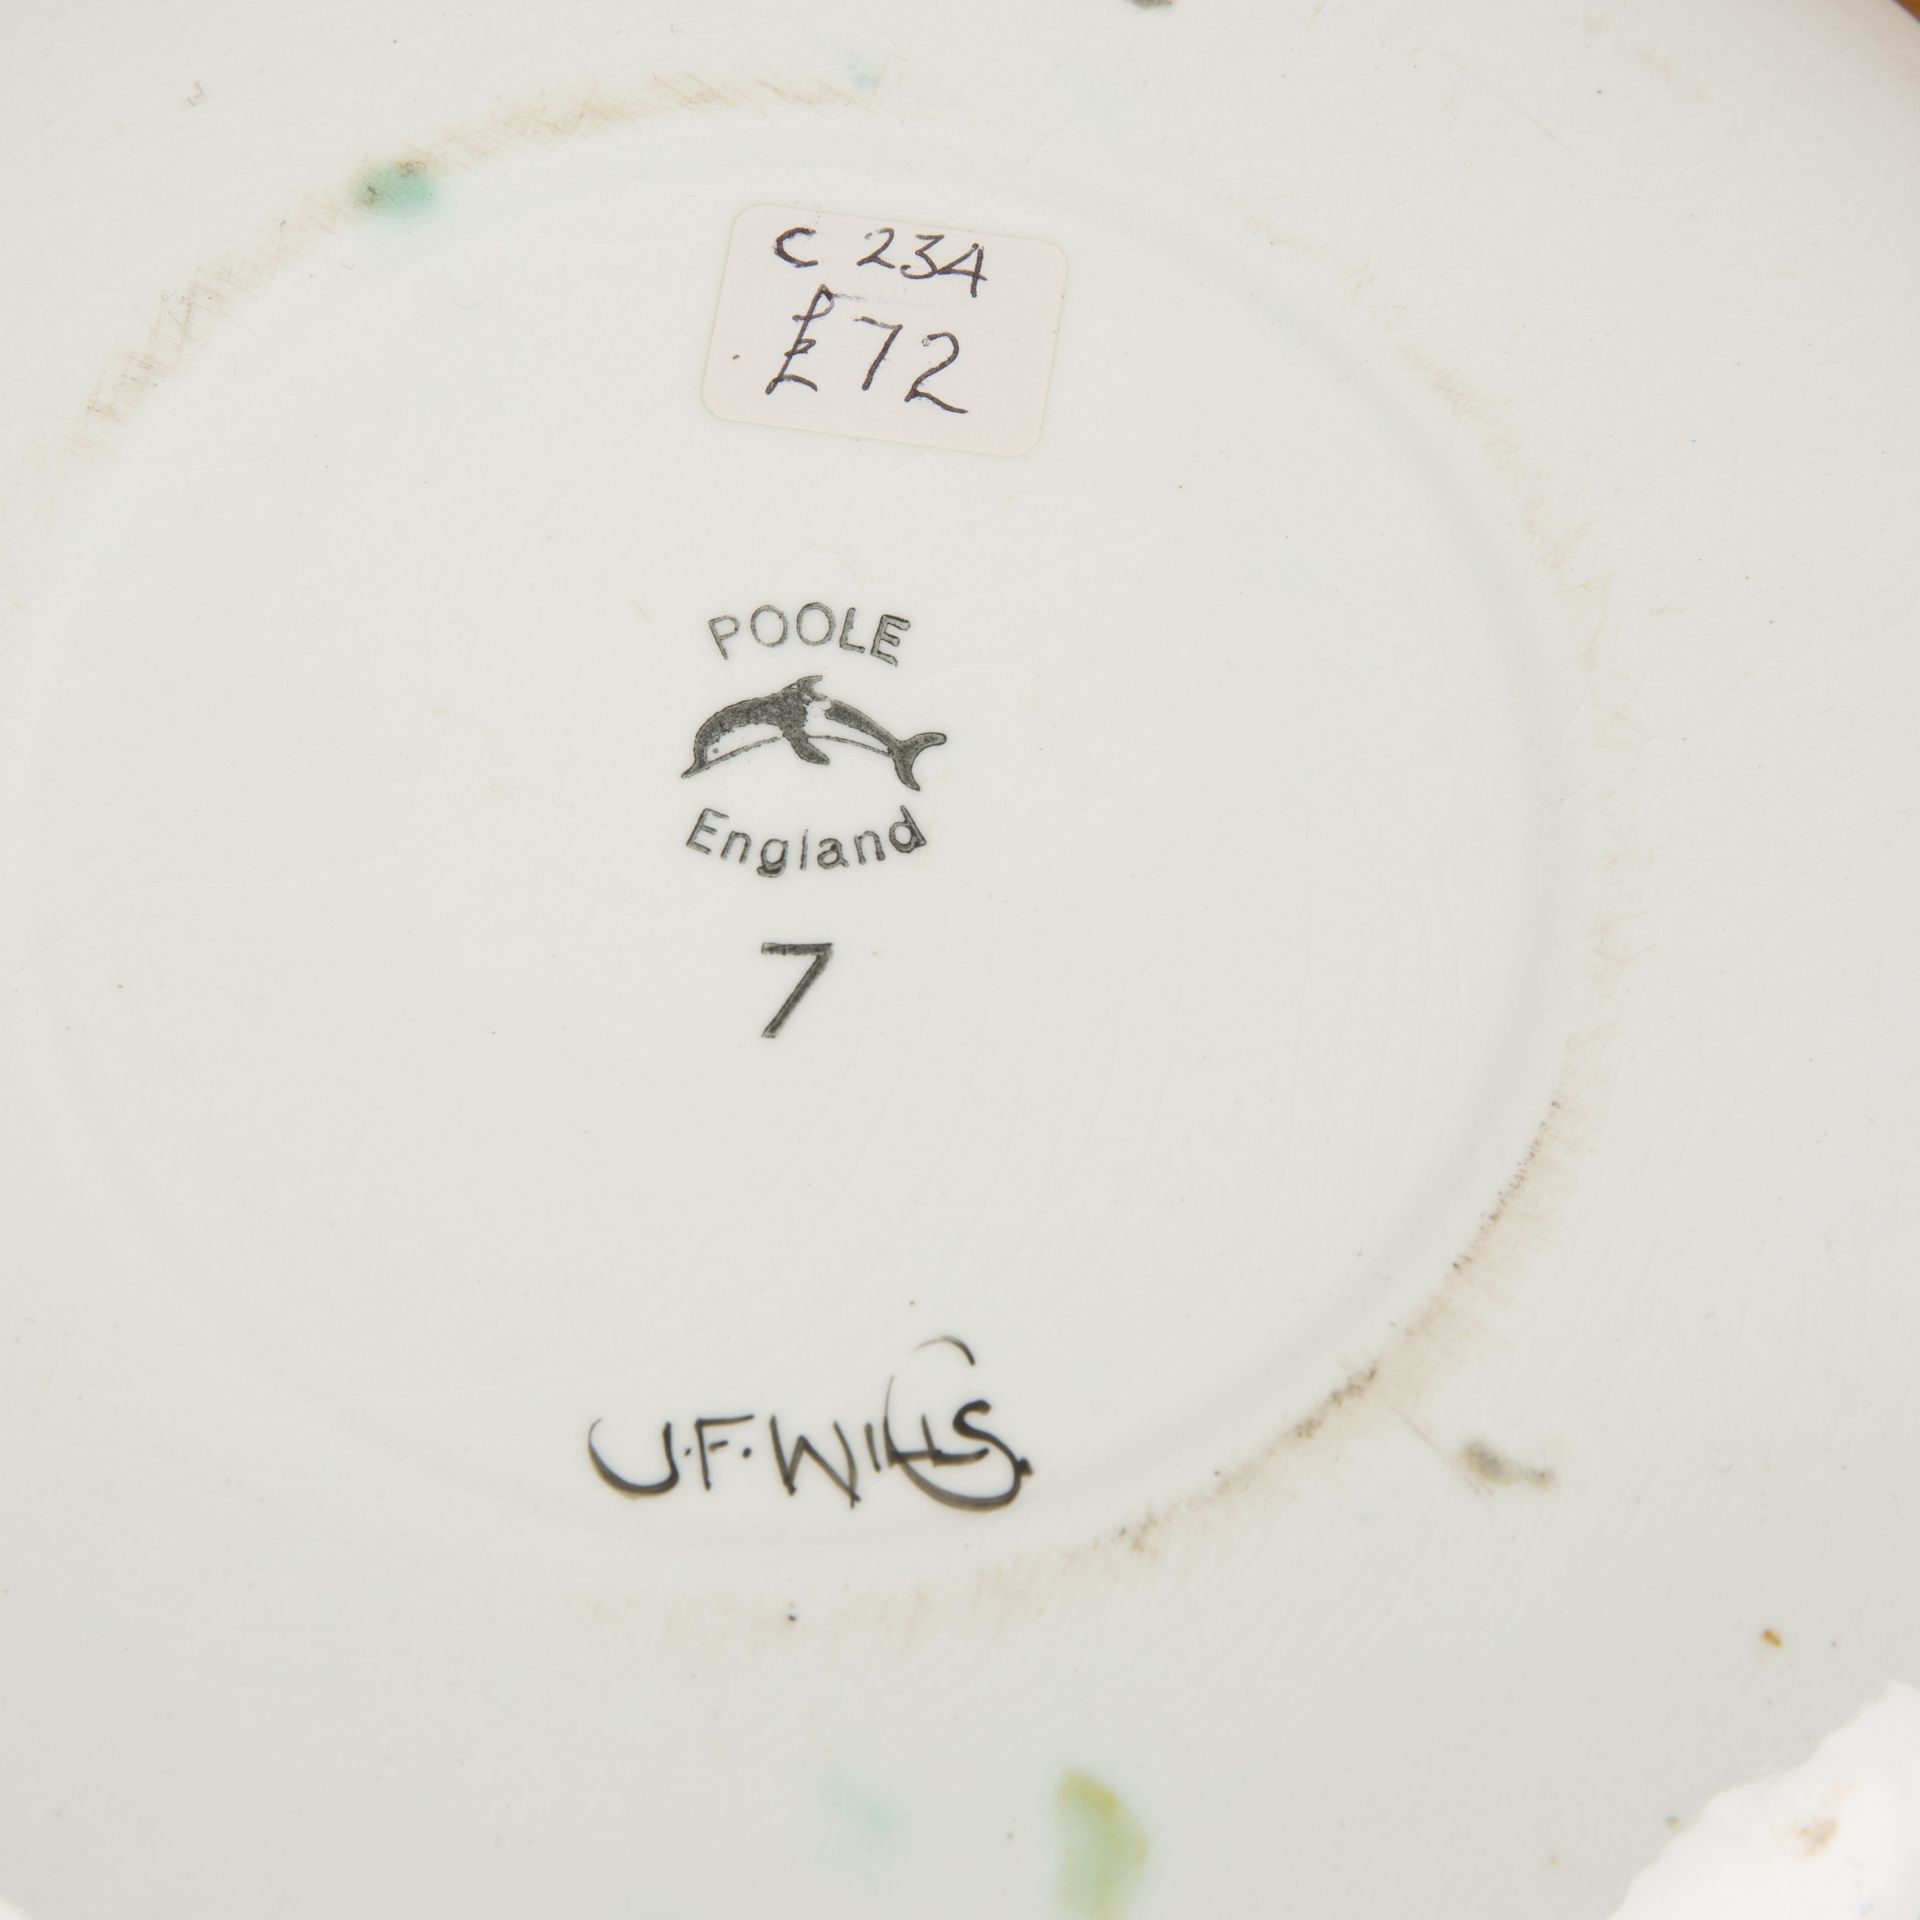 Collection of Poole Pottery comprising a Ionian ware dish with a black rim, decorated by Julie - Image 4 of 4